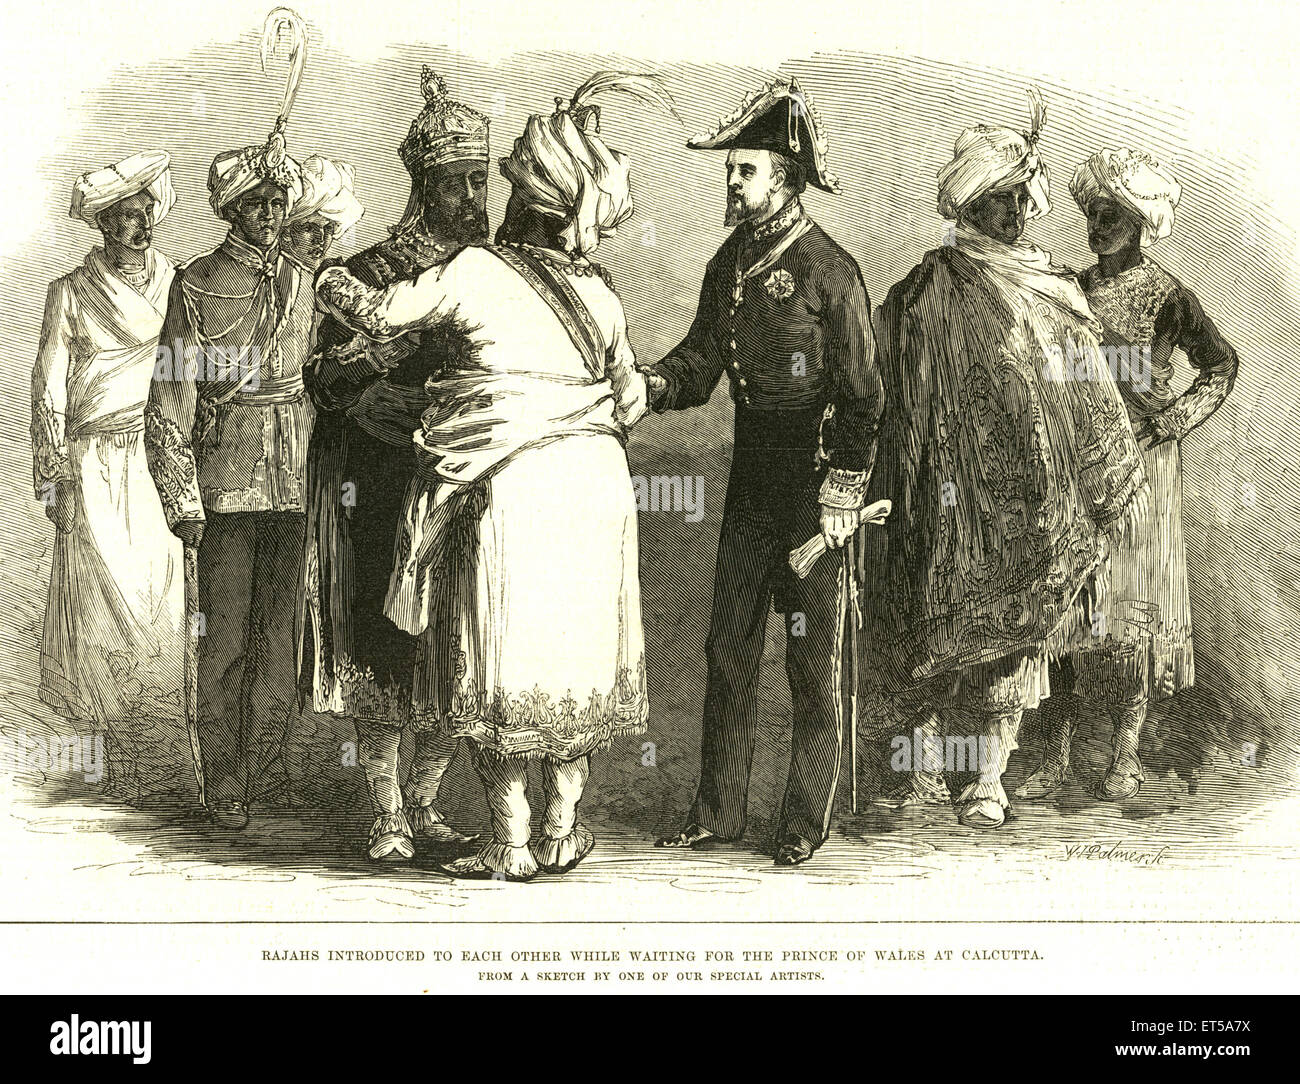 Lithographic portraits Rajah's Introduced to each other while waiting for the Prince of Wales at Calcutta ; West Bengal ; India ; old vintage 1800s en Stock Photo